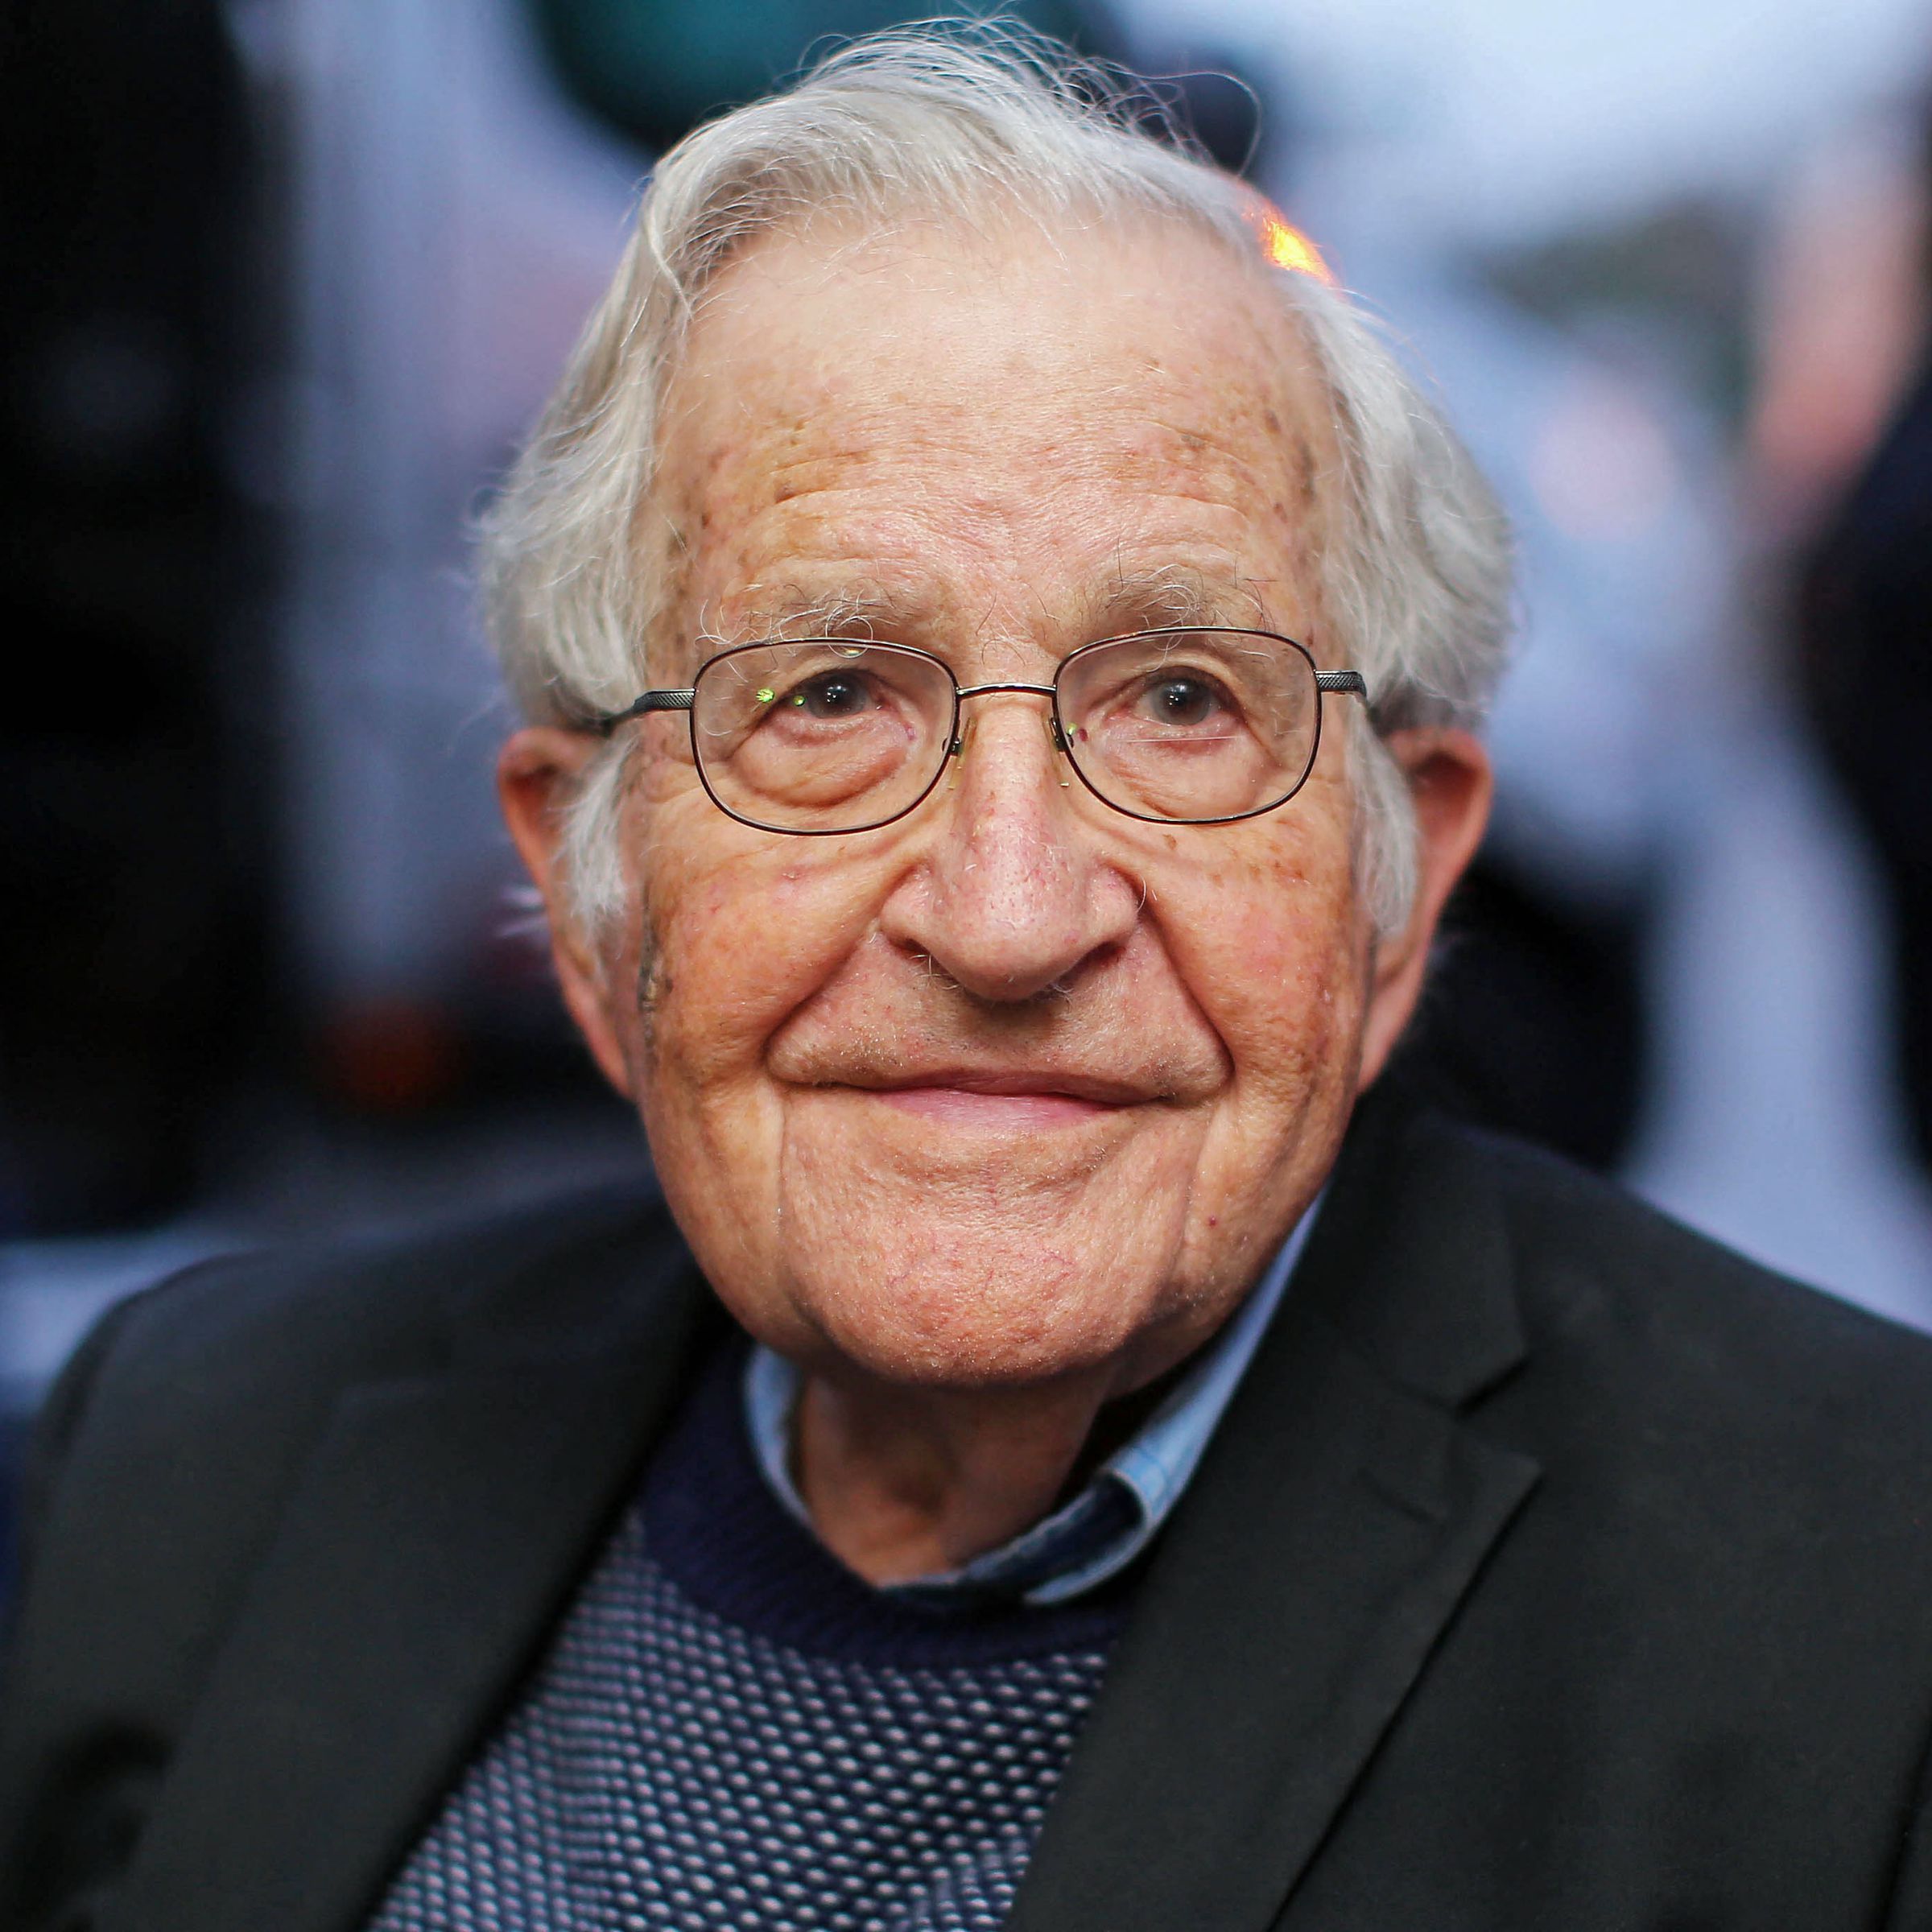 Chomsky often was critical of the media.